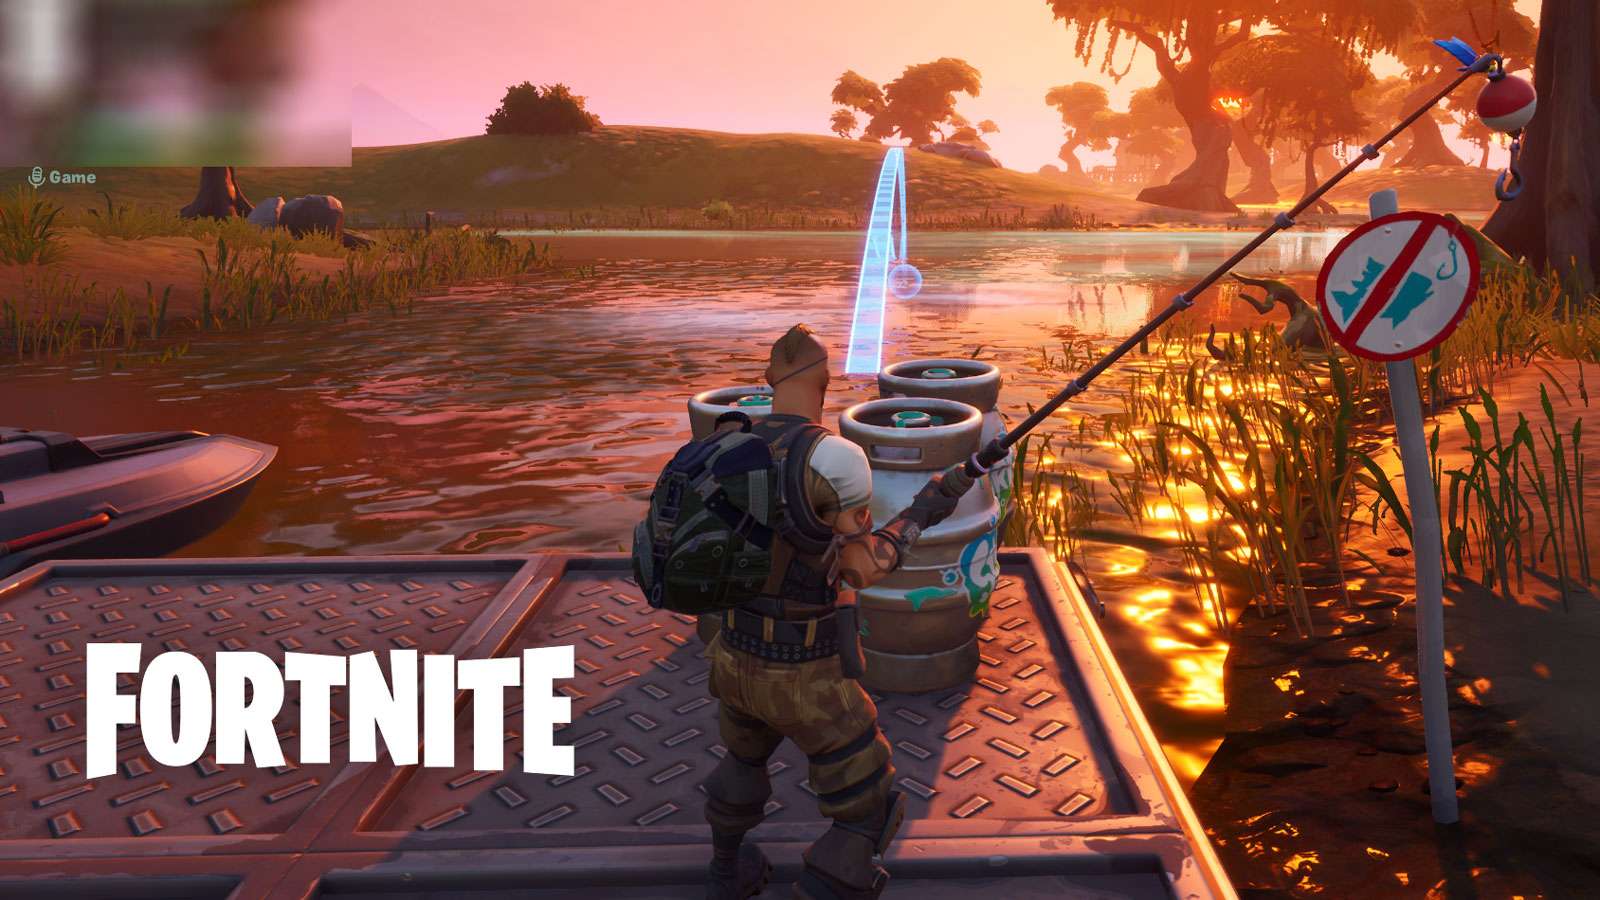 Man fishing by pond in Fortnite